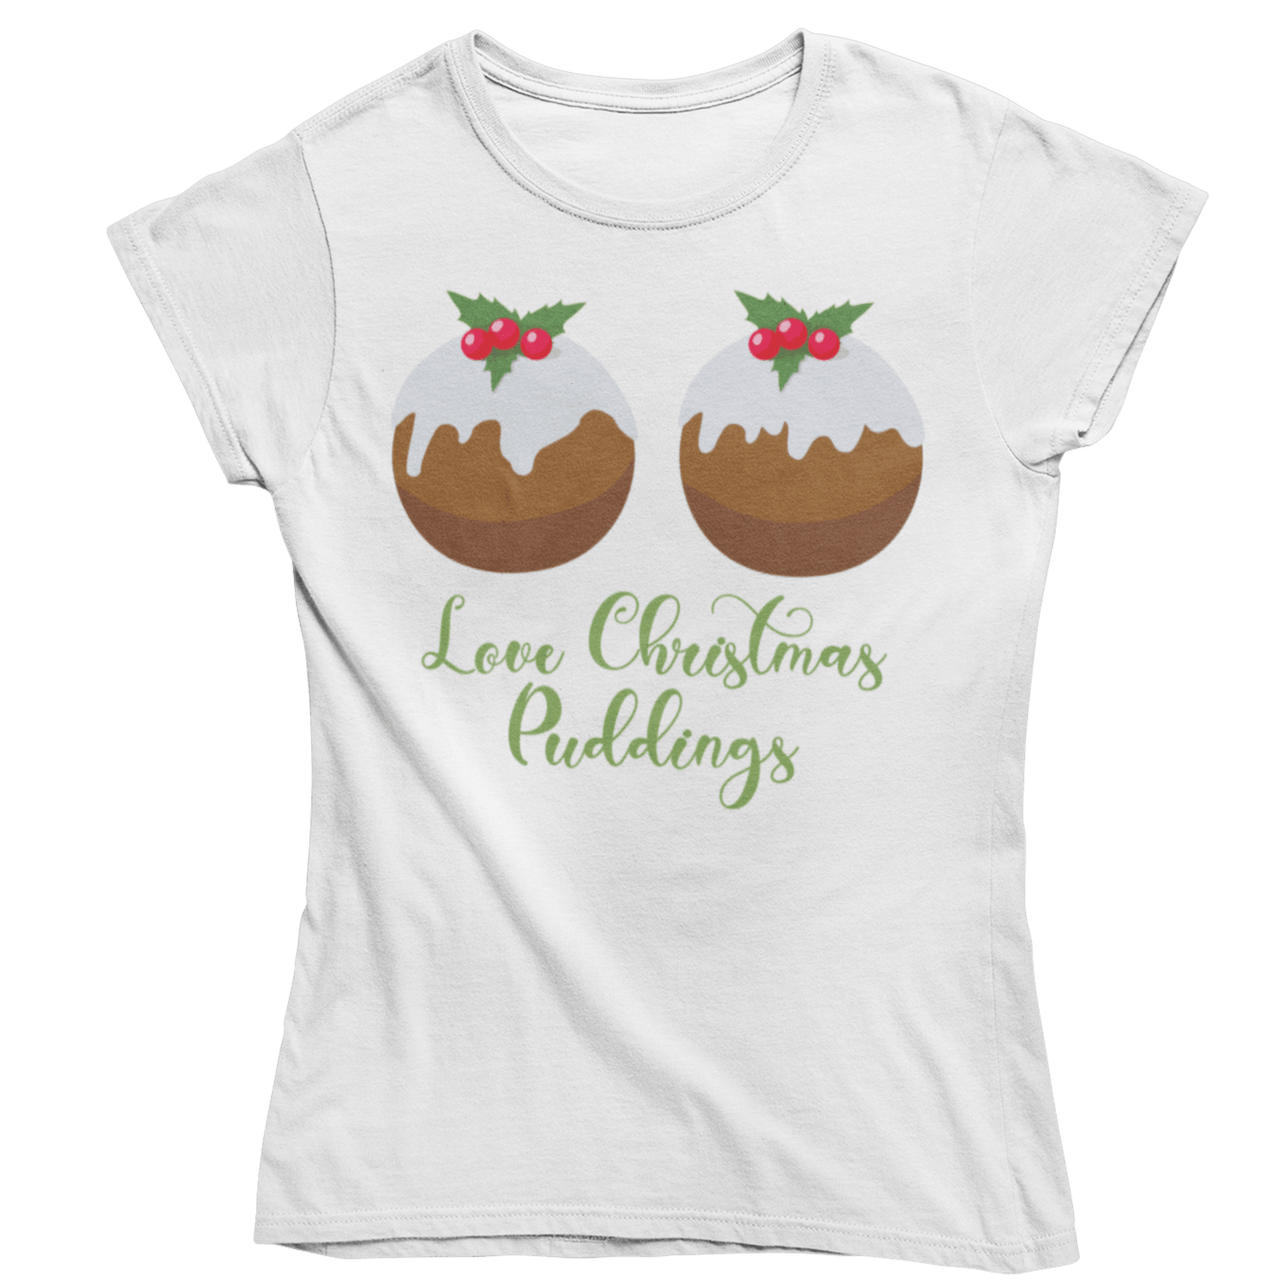 Love Christmas Puddings Fitted Womens T-Shirt 8Ball